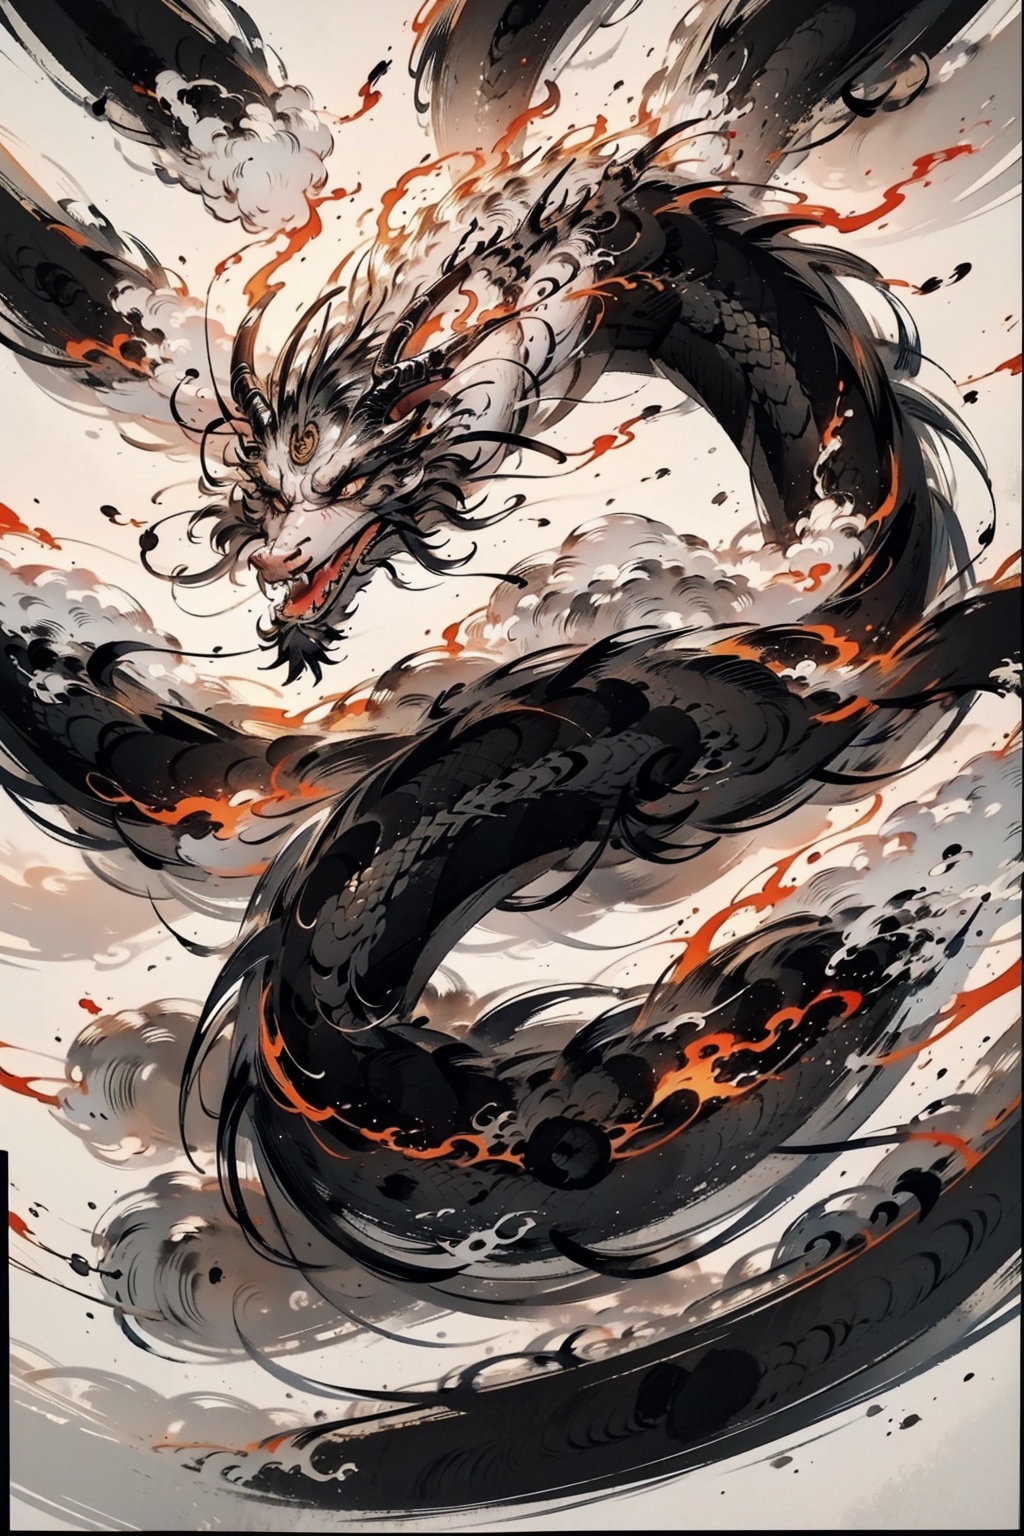  Chinese dragons_ink and wash styles_misty clouds_ancient paintings_flames,Sharp African claws